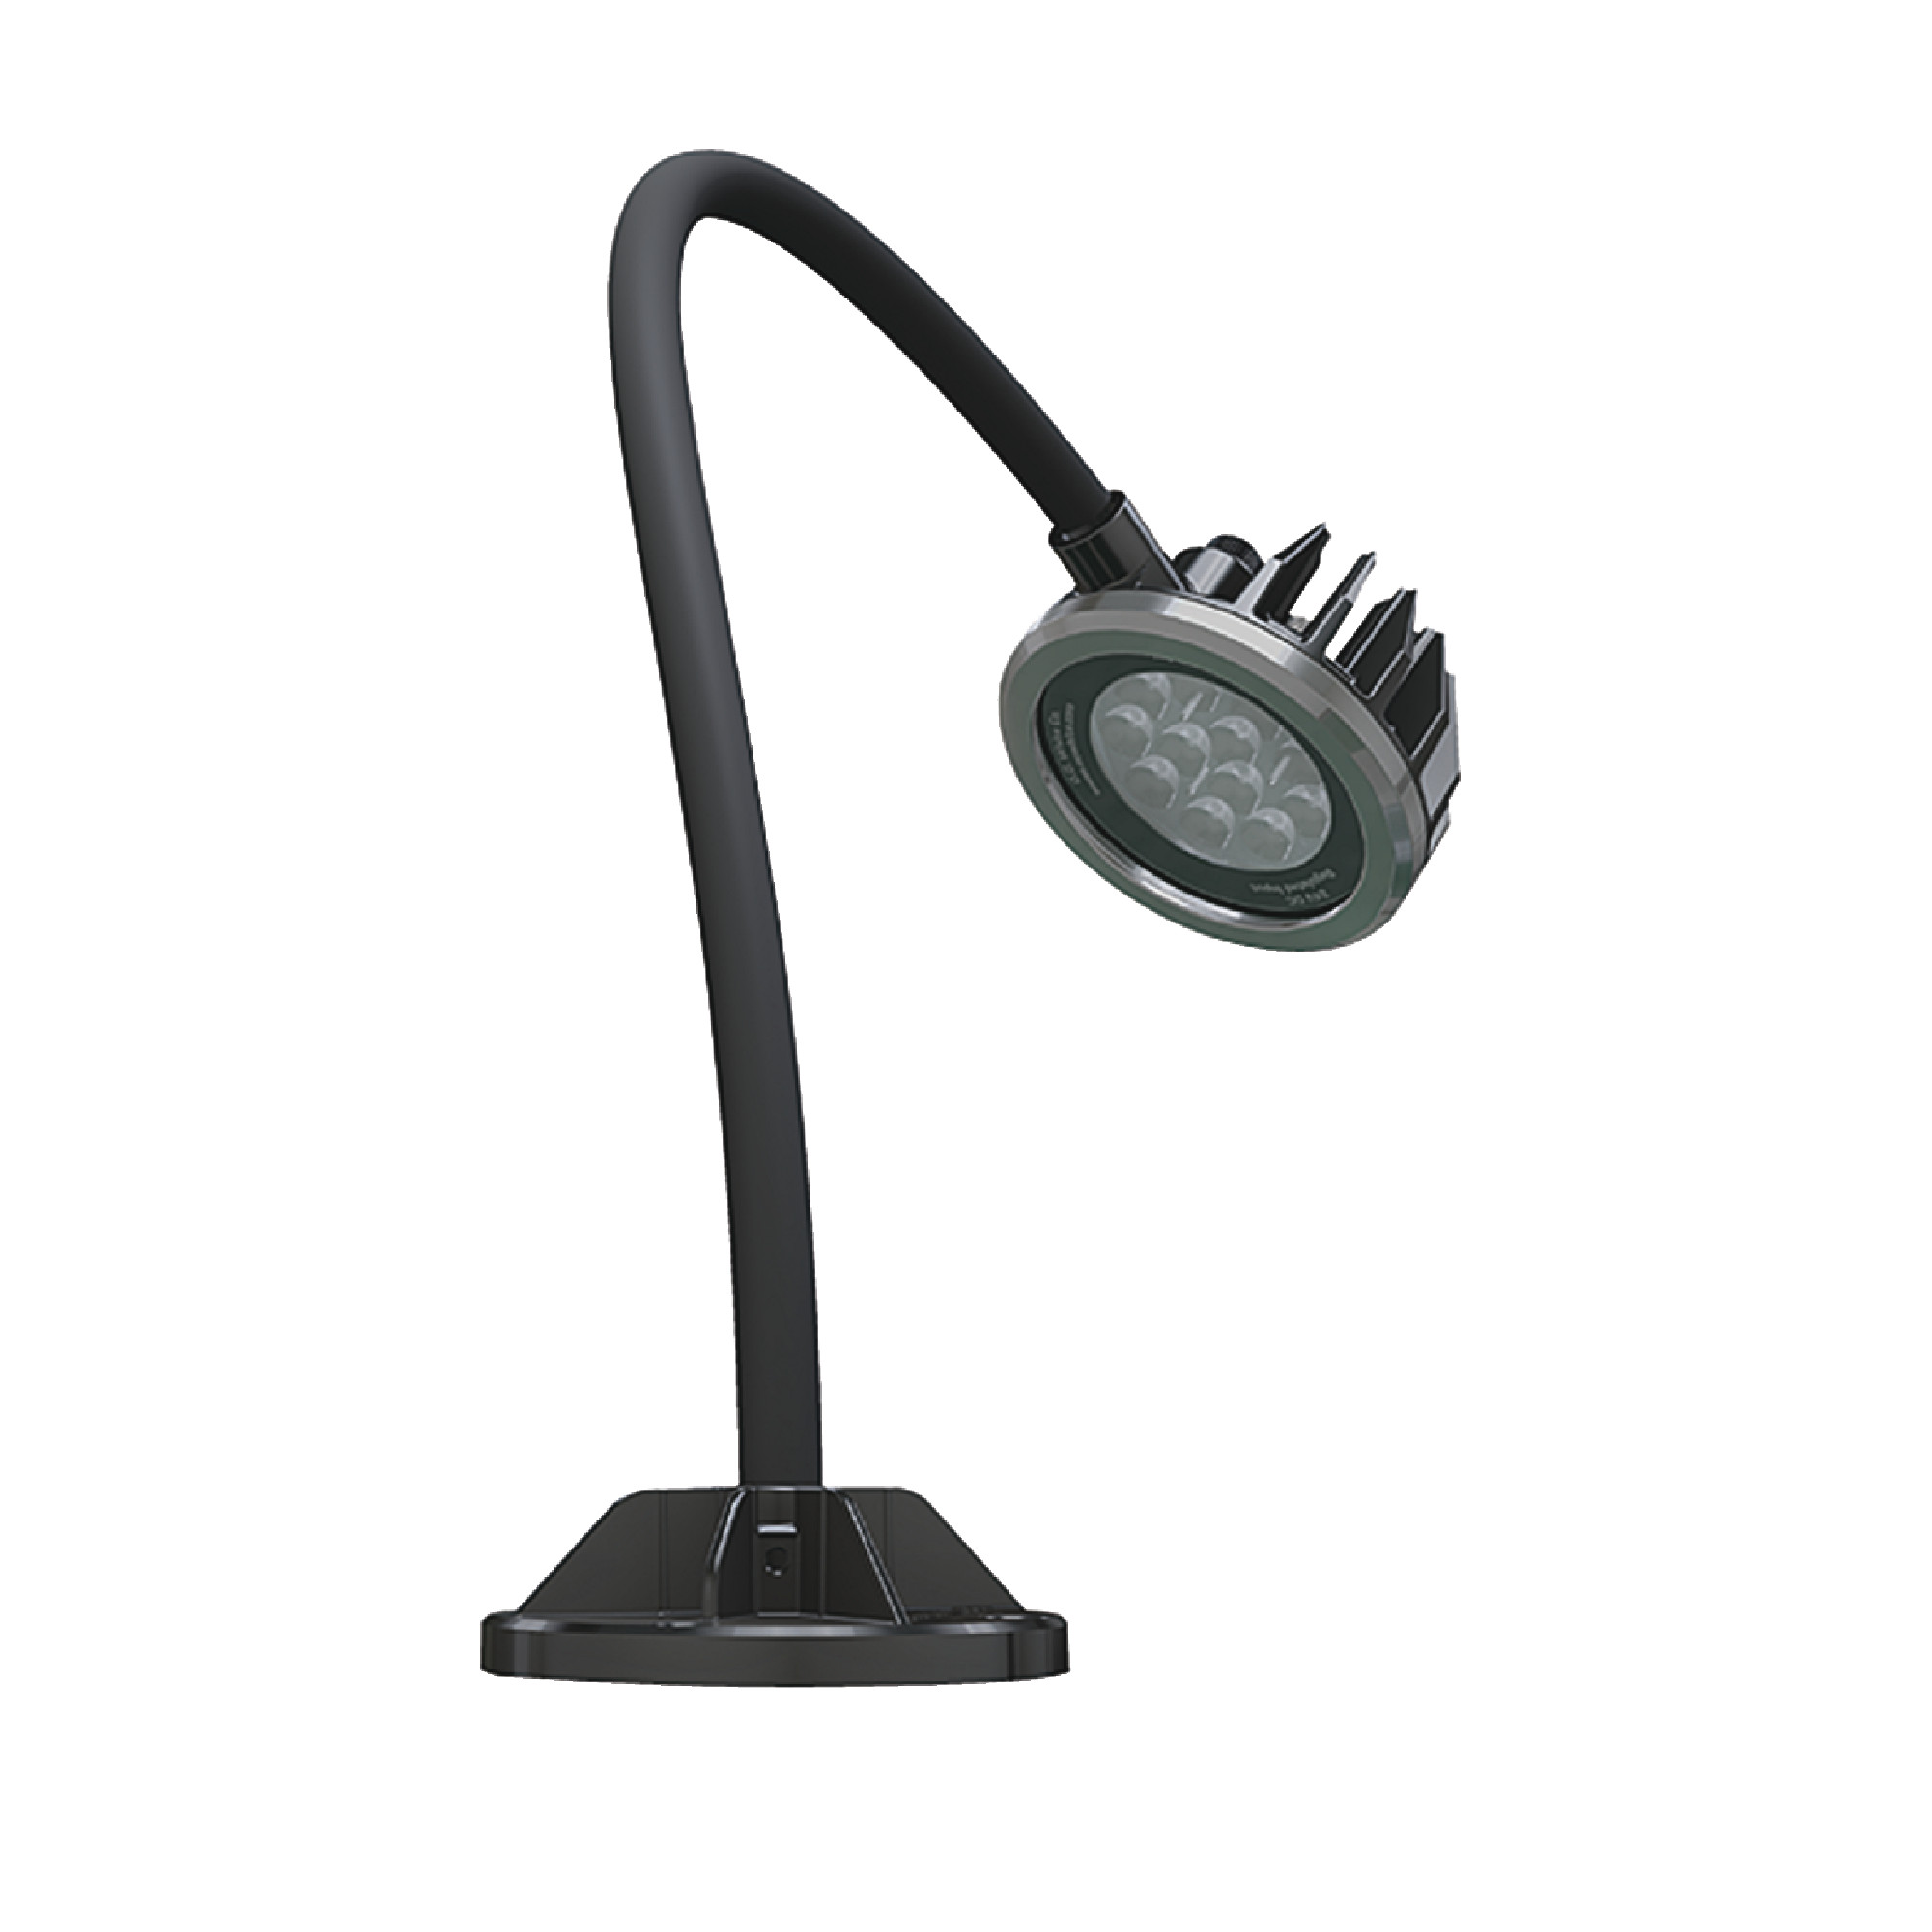 LED Machine Spotlight-18" Gooseneck Adjustable Screw Mount or Magnet with Built-in Dimming Switch